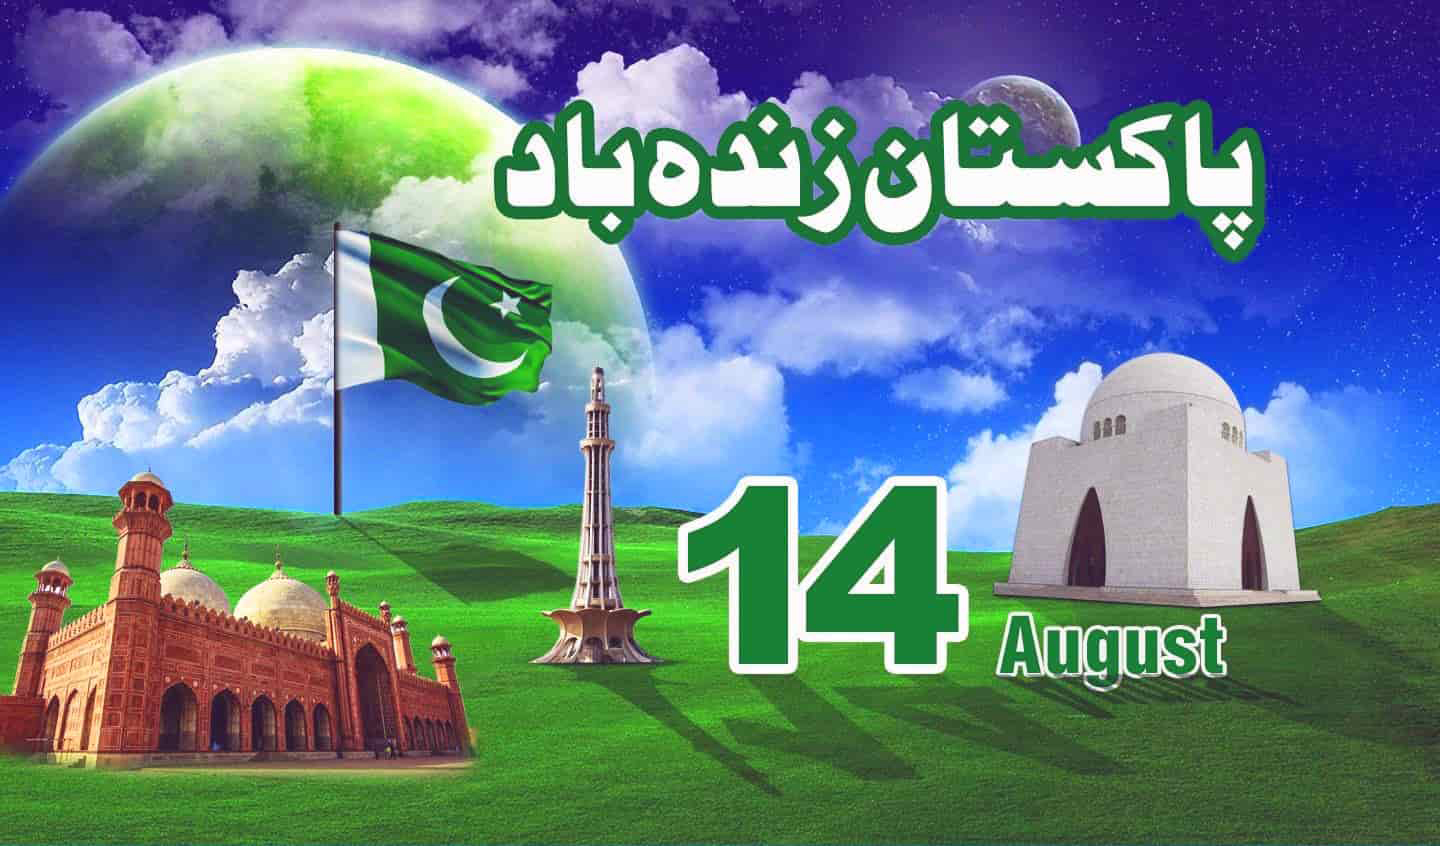 Happy Independence Day 14th August 2021 Facebook Covers